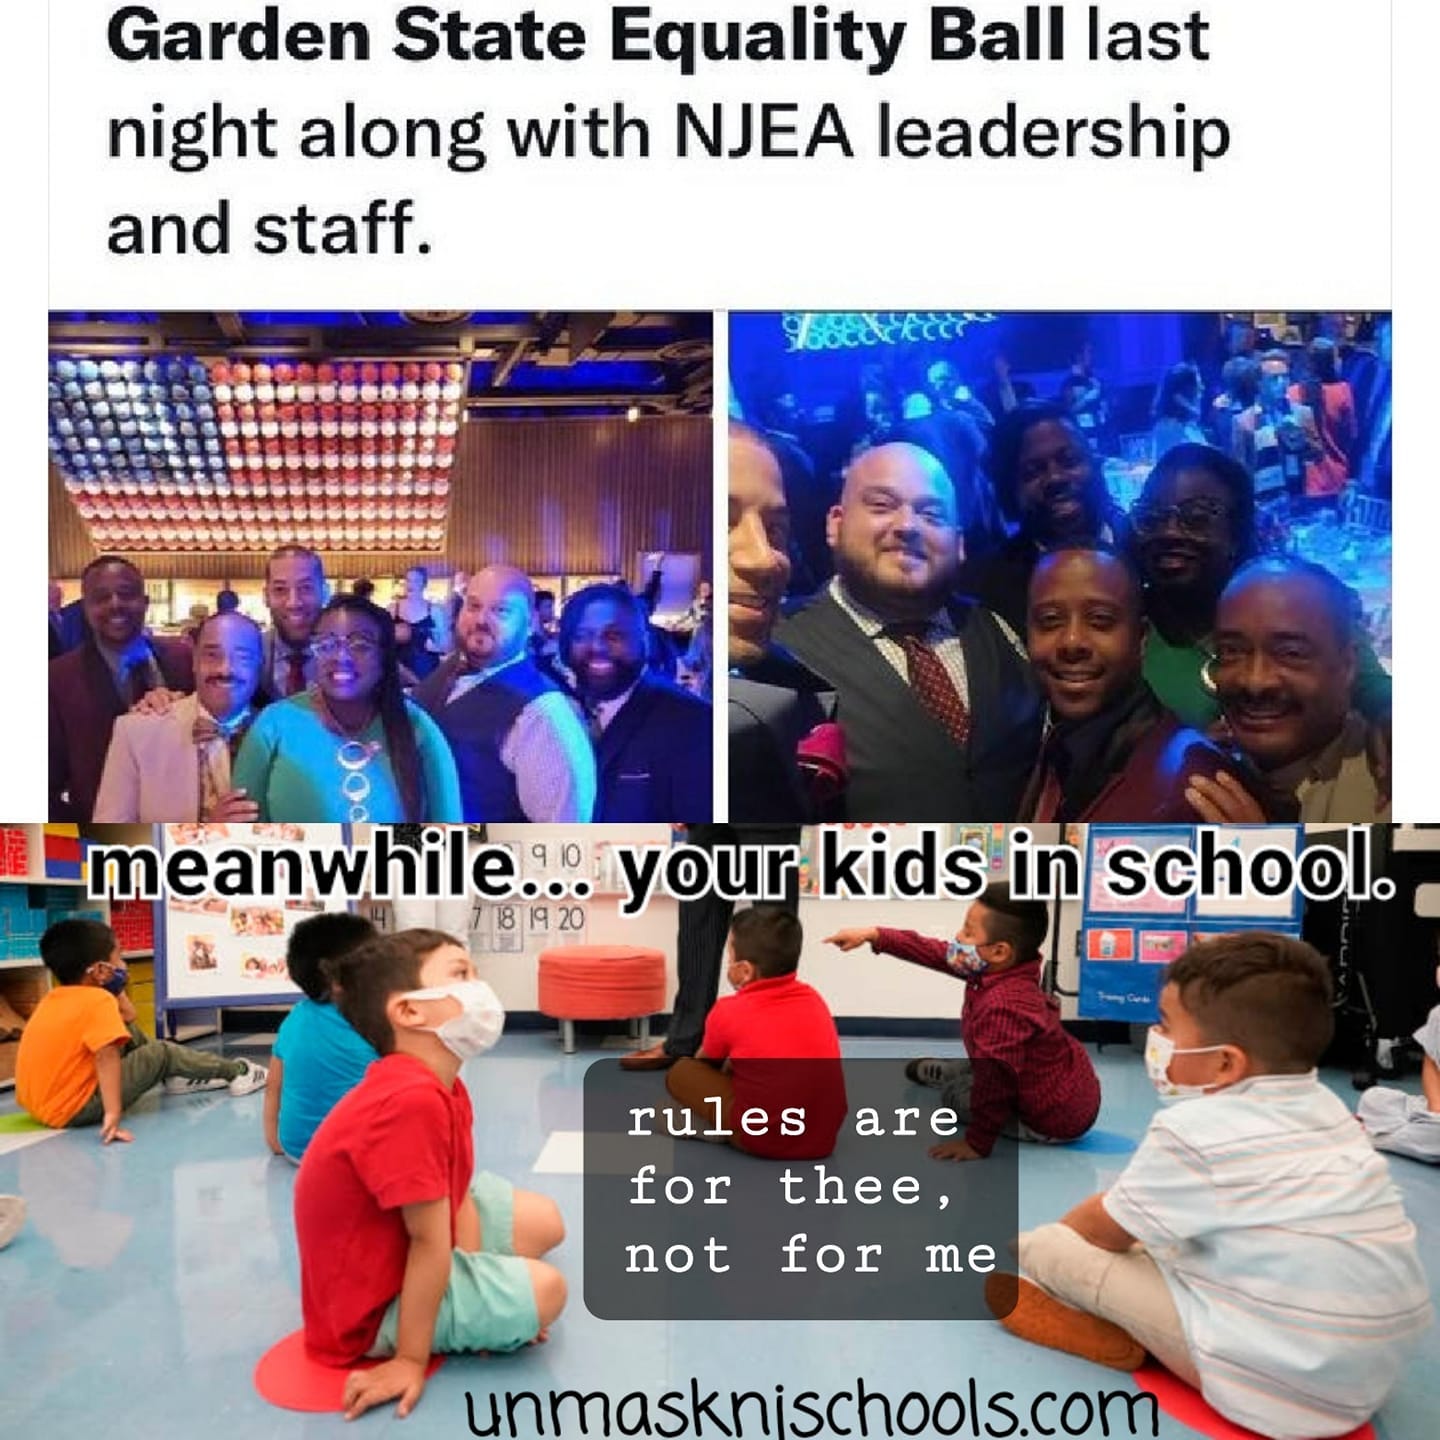 May be an image of 5 people, people standing and text that says 'Garden State Equality Ball last night along with NJEA leadership and staff. 山 meanwhile.. in school. 181920 yourkids your rules are for thee, not for me unmasknischools.com'